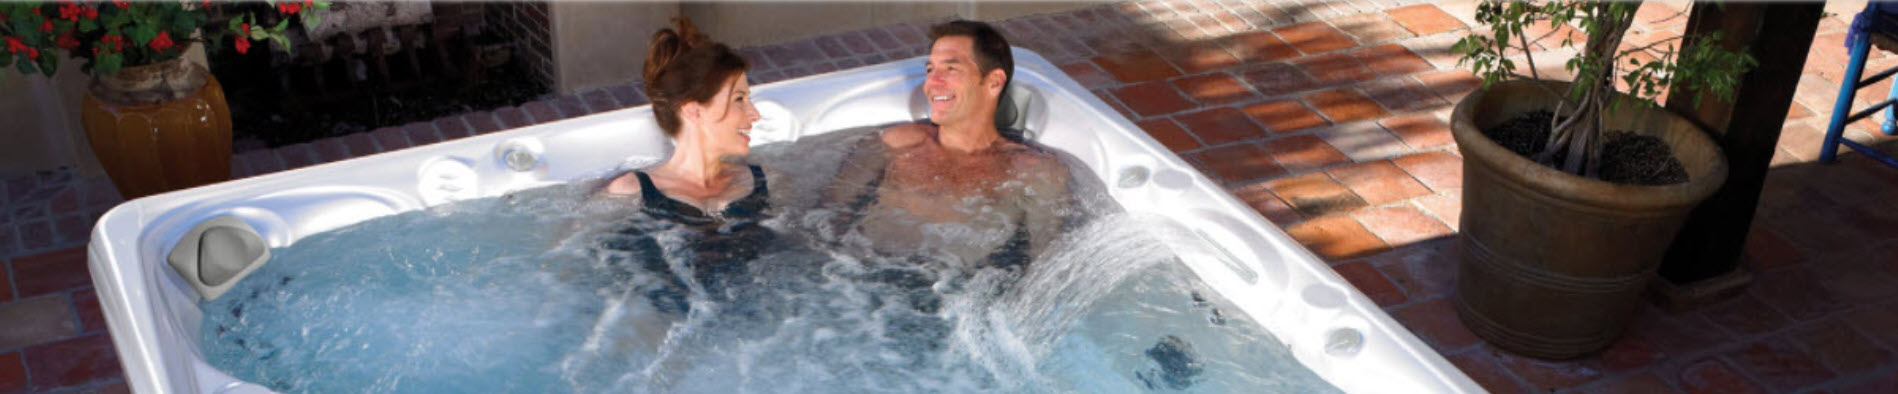 Improve Health in Minutes a Day With a Hot Tub at Home, Steamboat Springs Hot Tubs